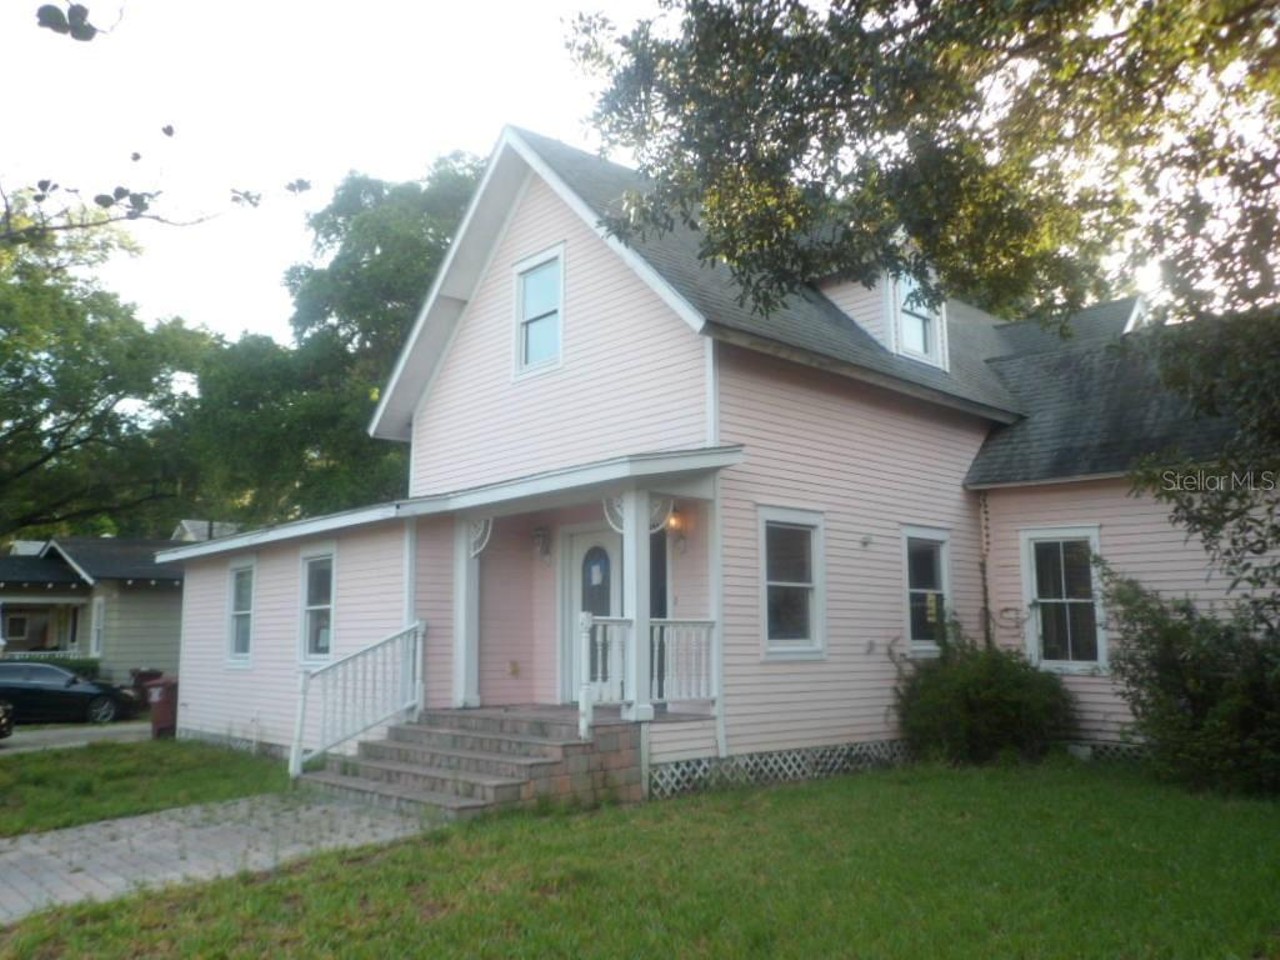 Let's take a tour of this 110-year-old house for sale in College Park